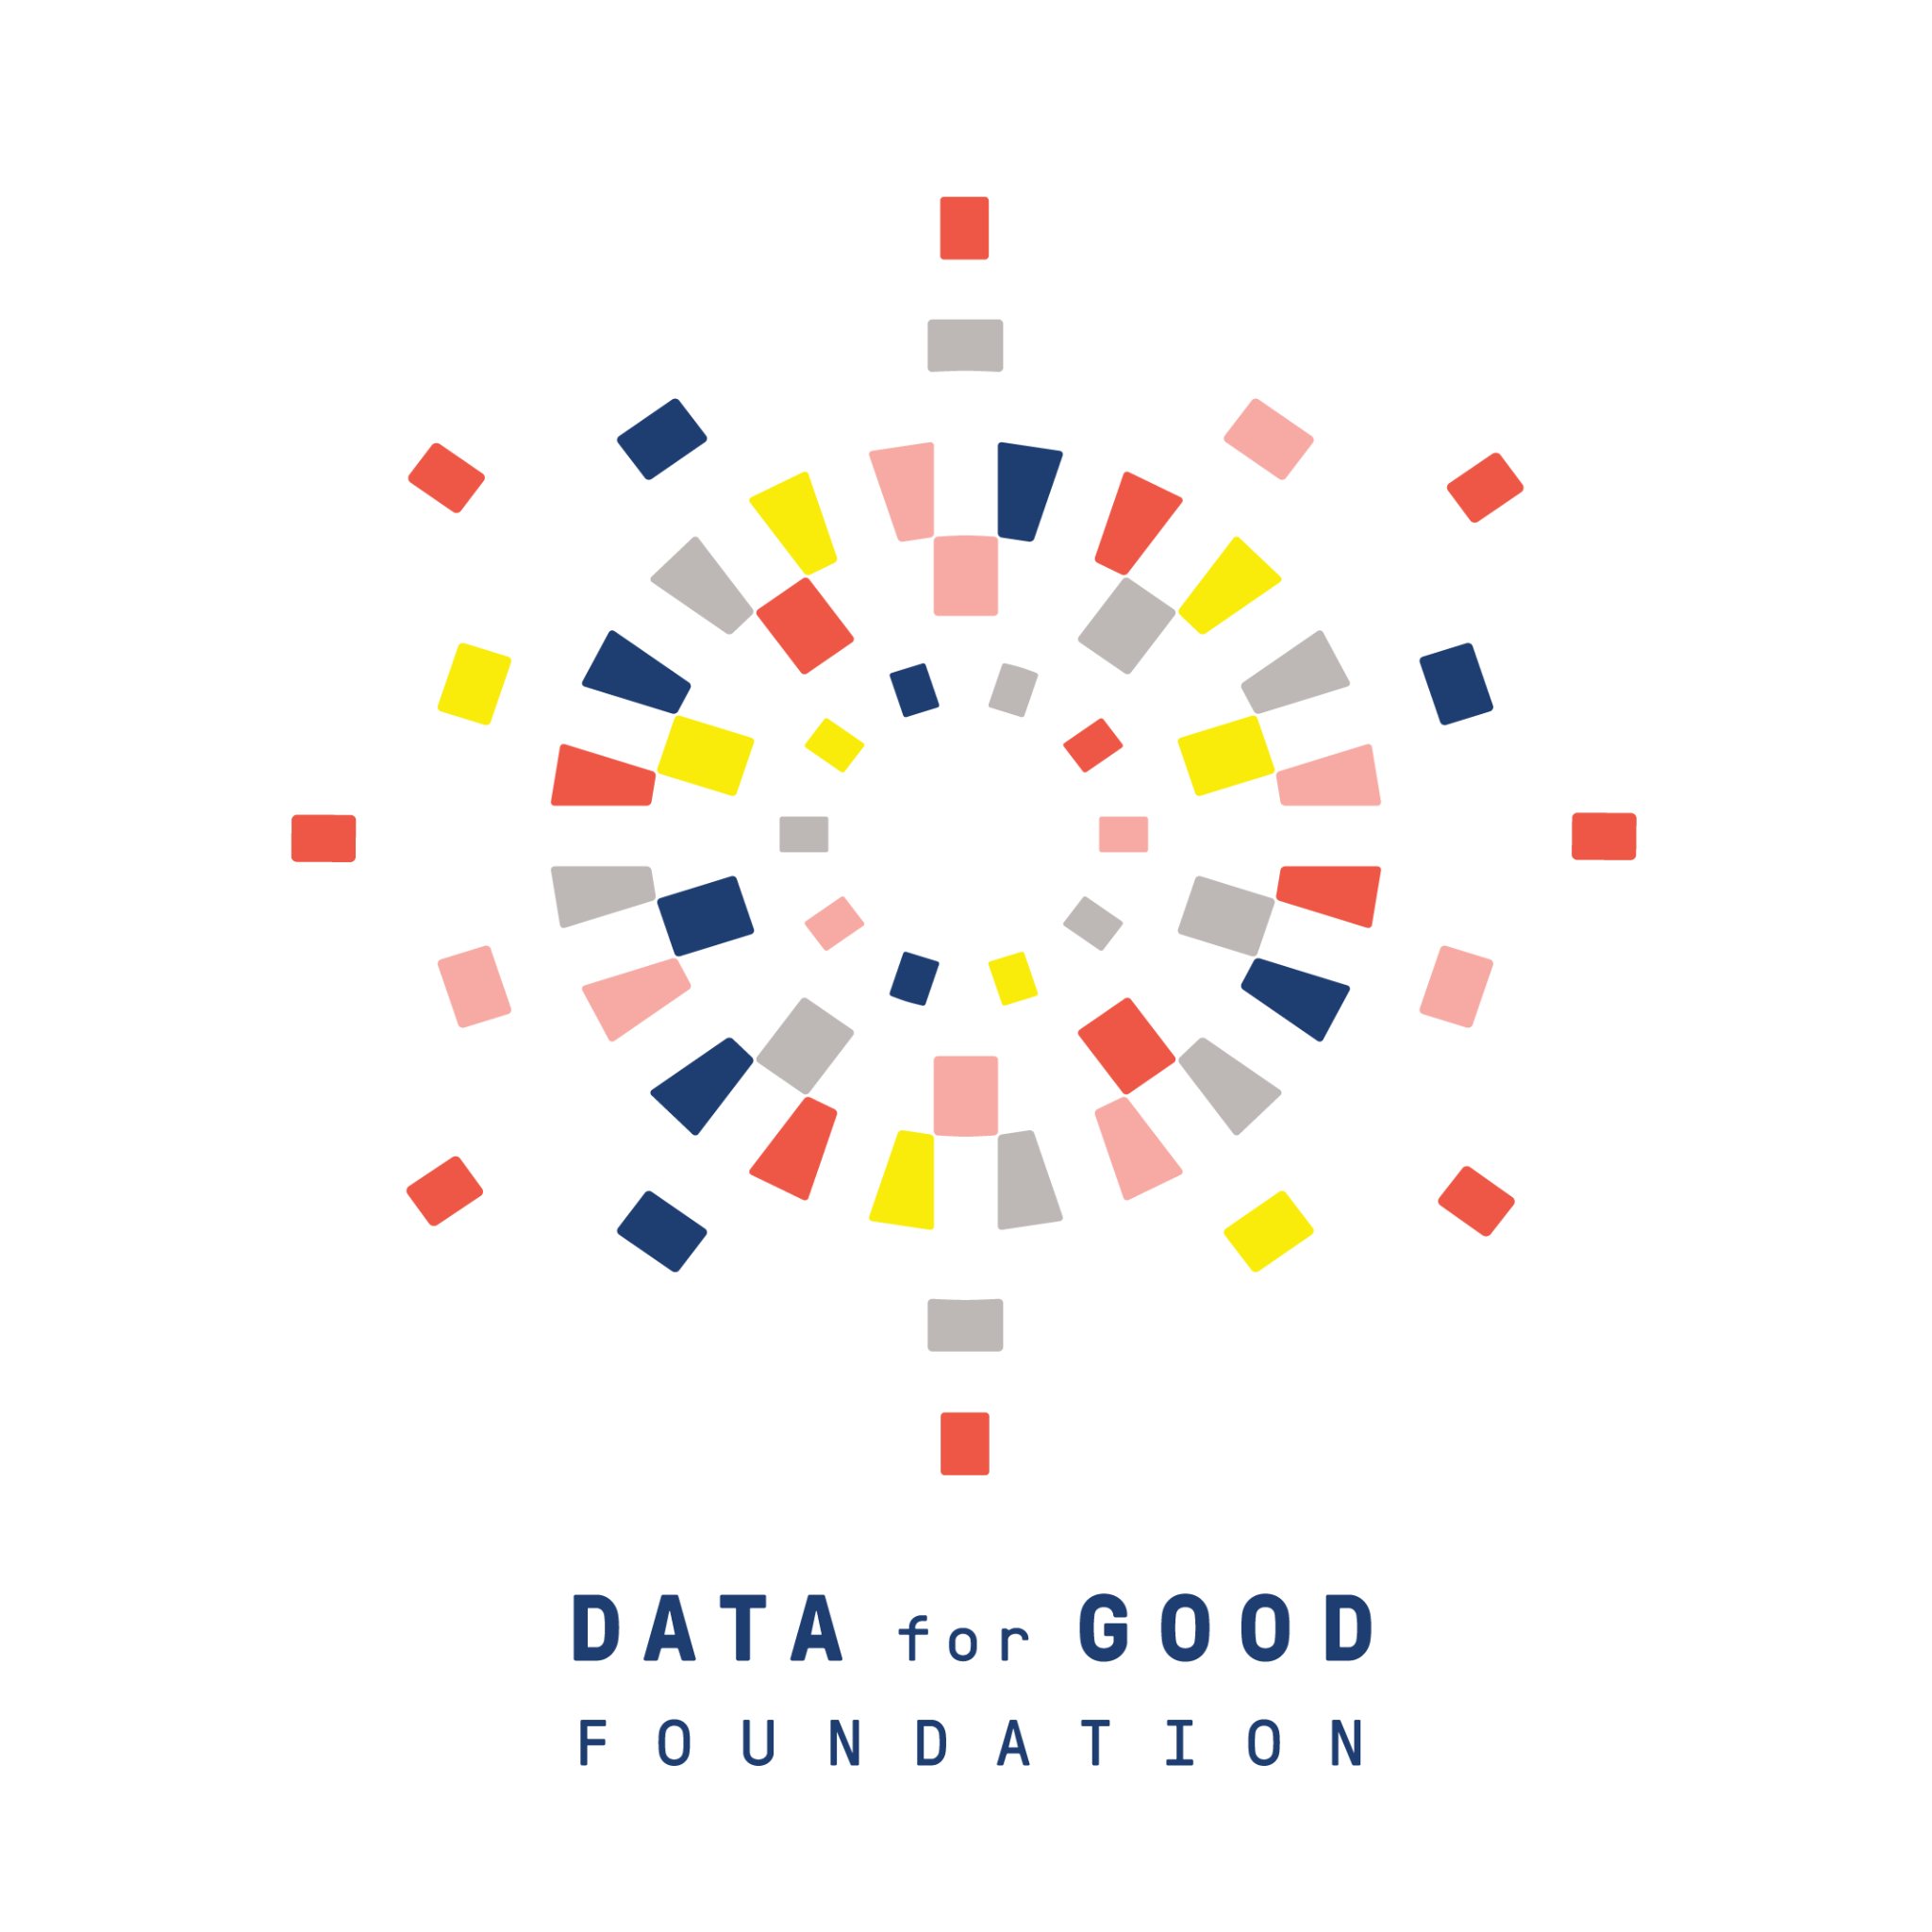 Data for Good Foundation is a data foundation and public health project allowing citizens to exercise the right to control, own and monetize their personal data